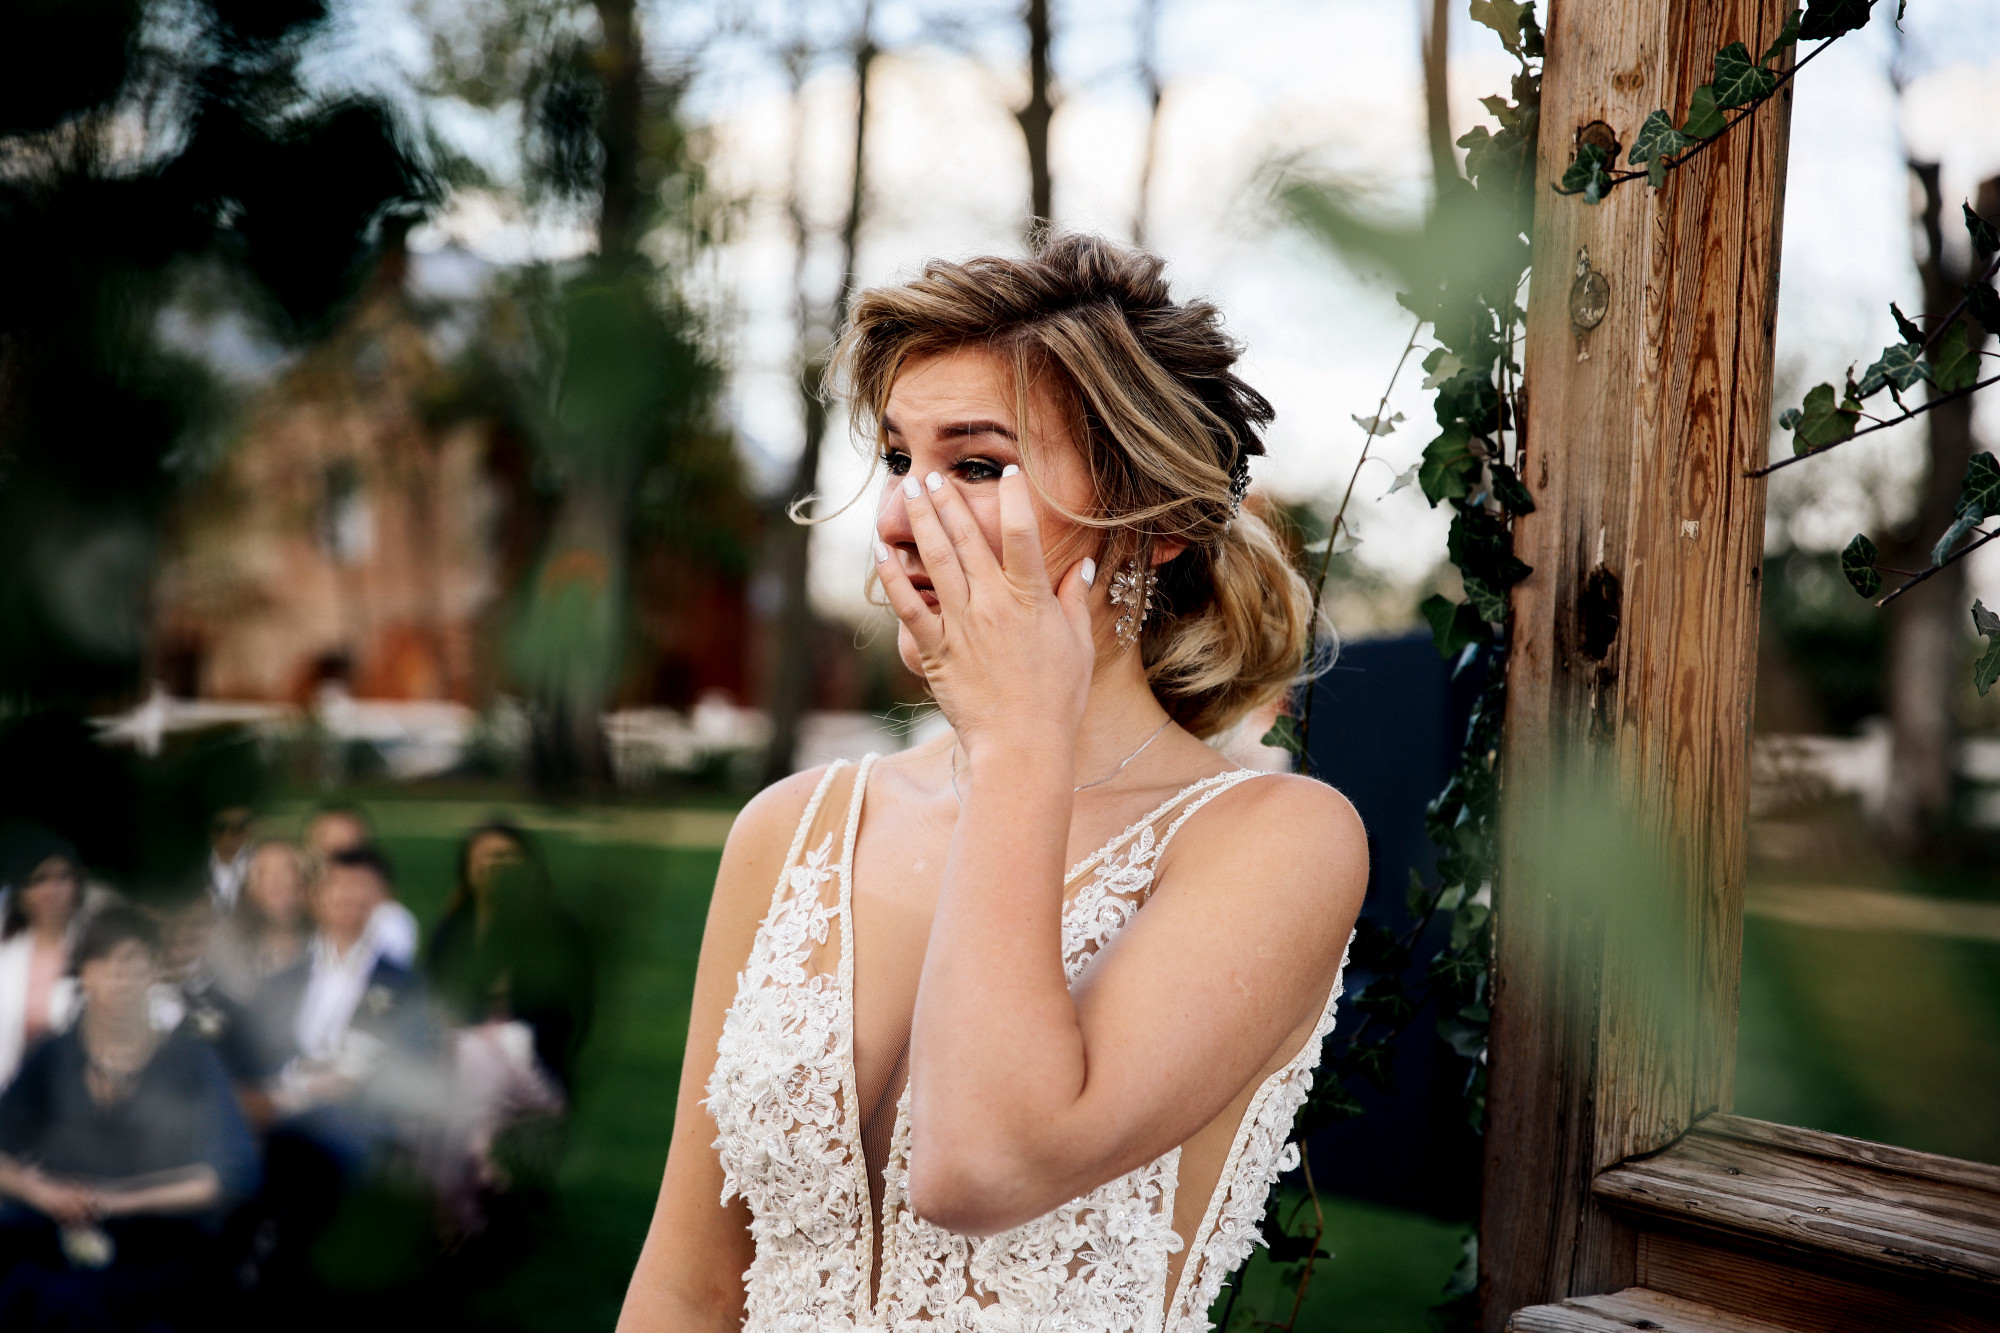 An upset bride wiping tears while crying on her wedding day | Source: Freepik